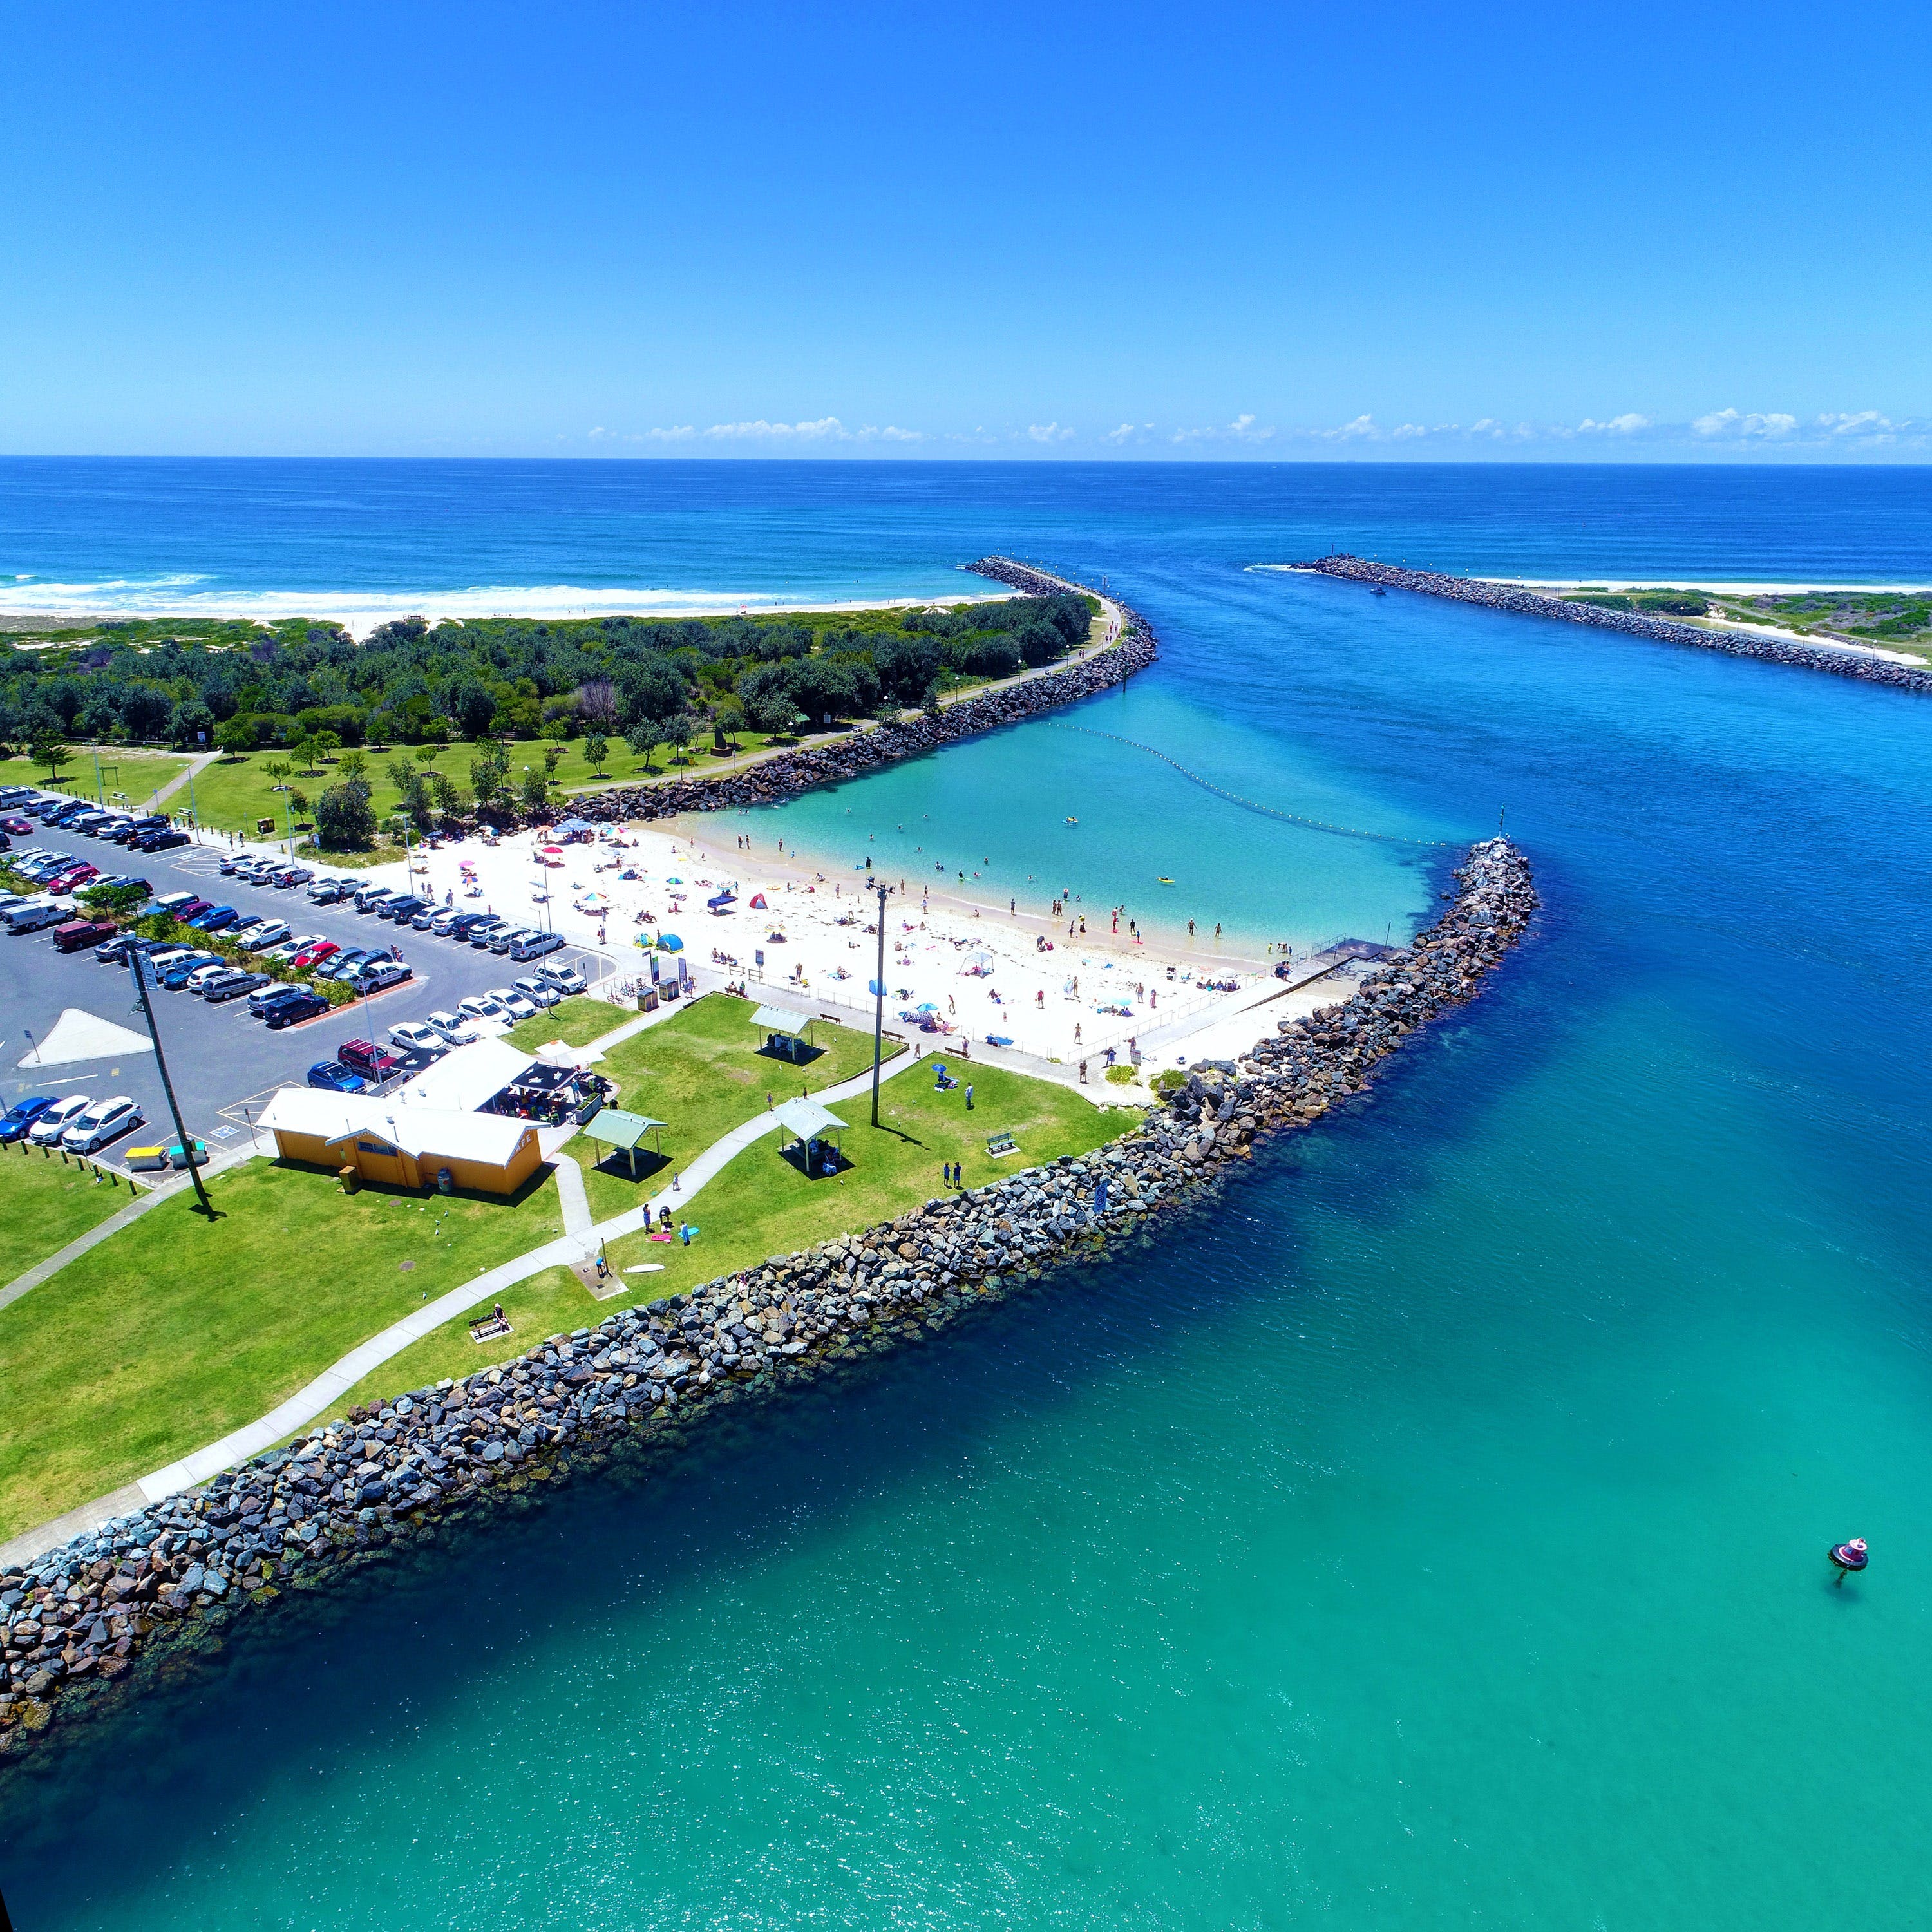 Tuncurry Rock Pool - Find Attractions